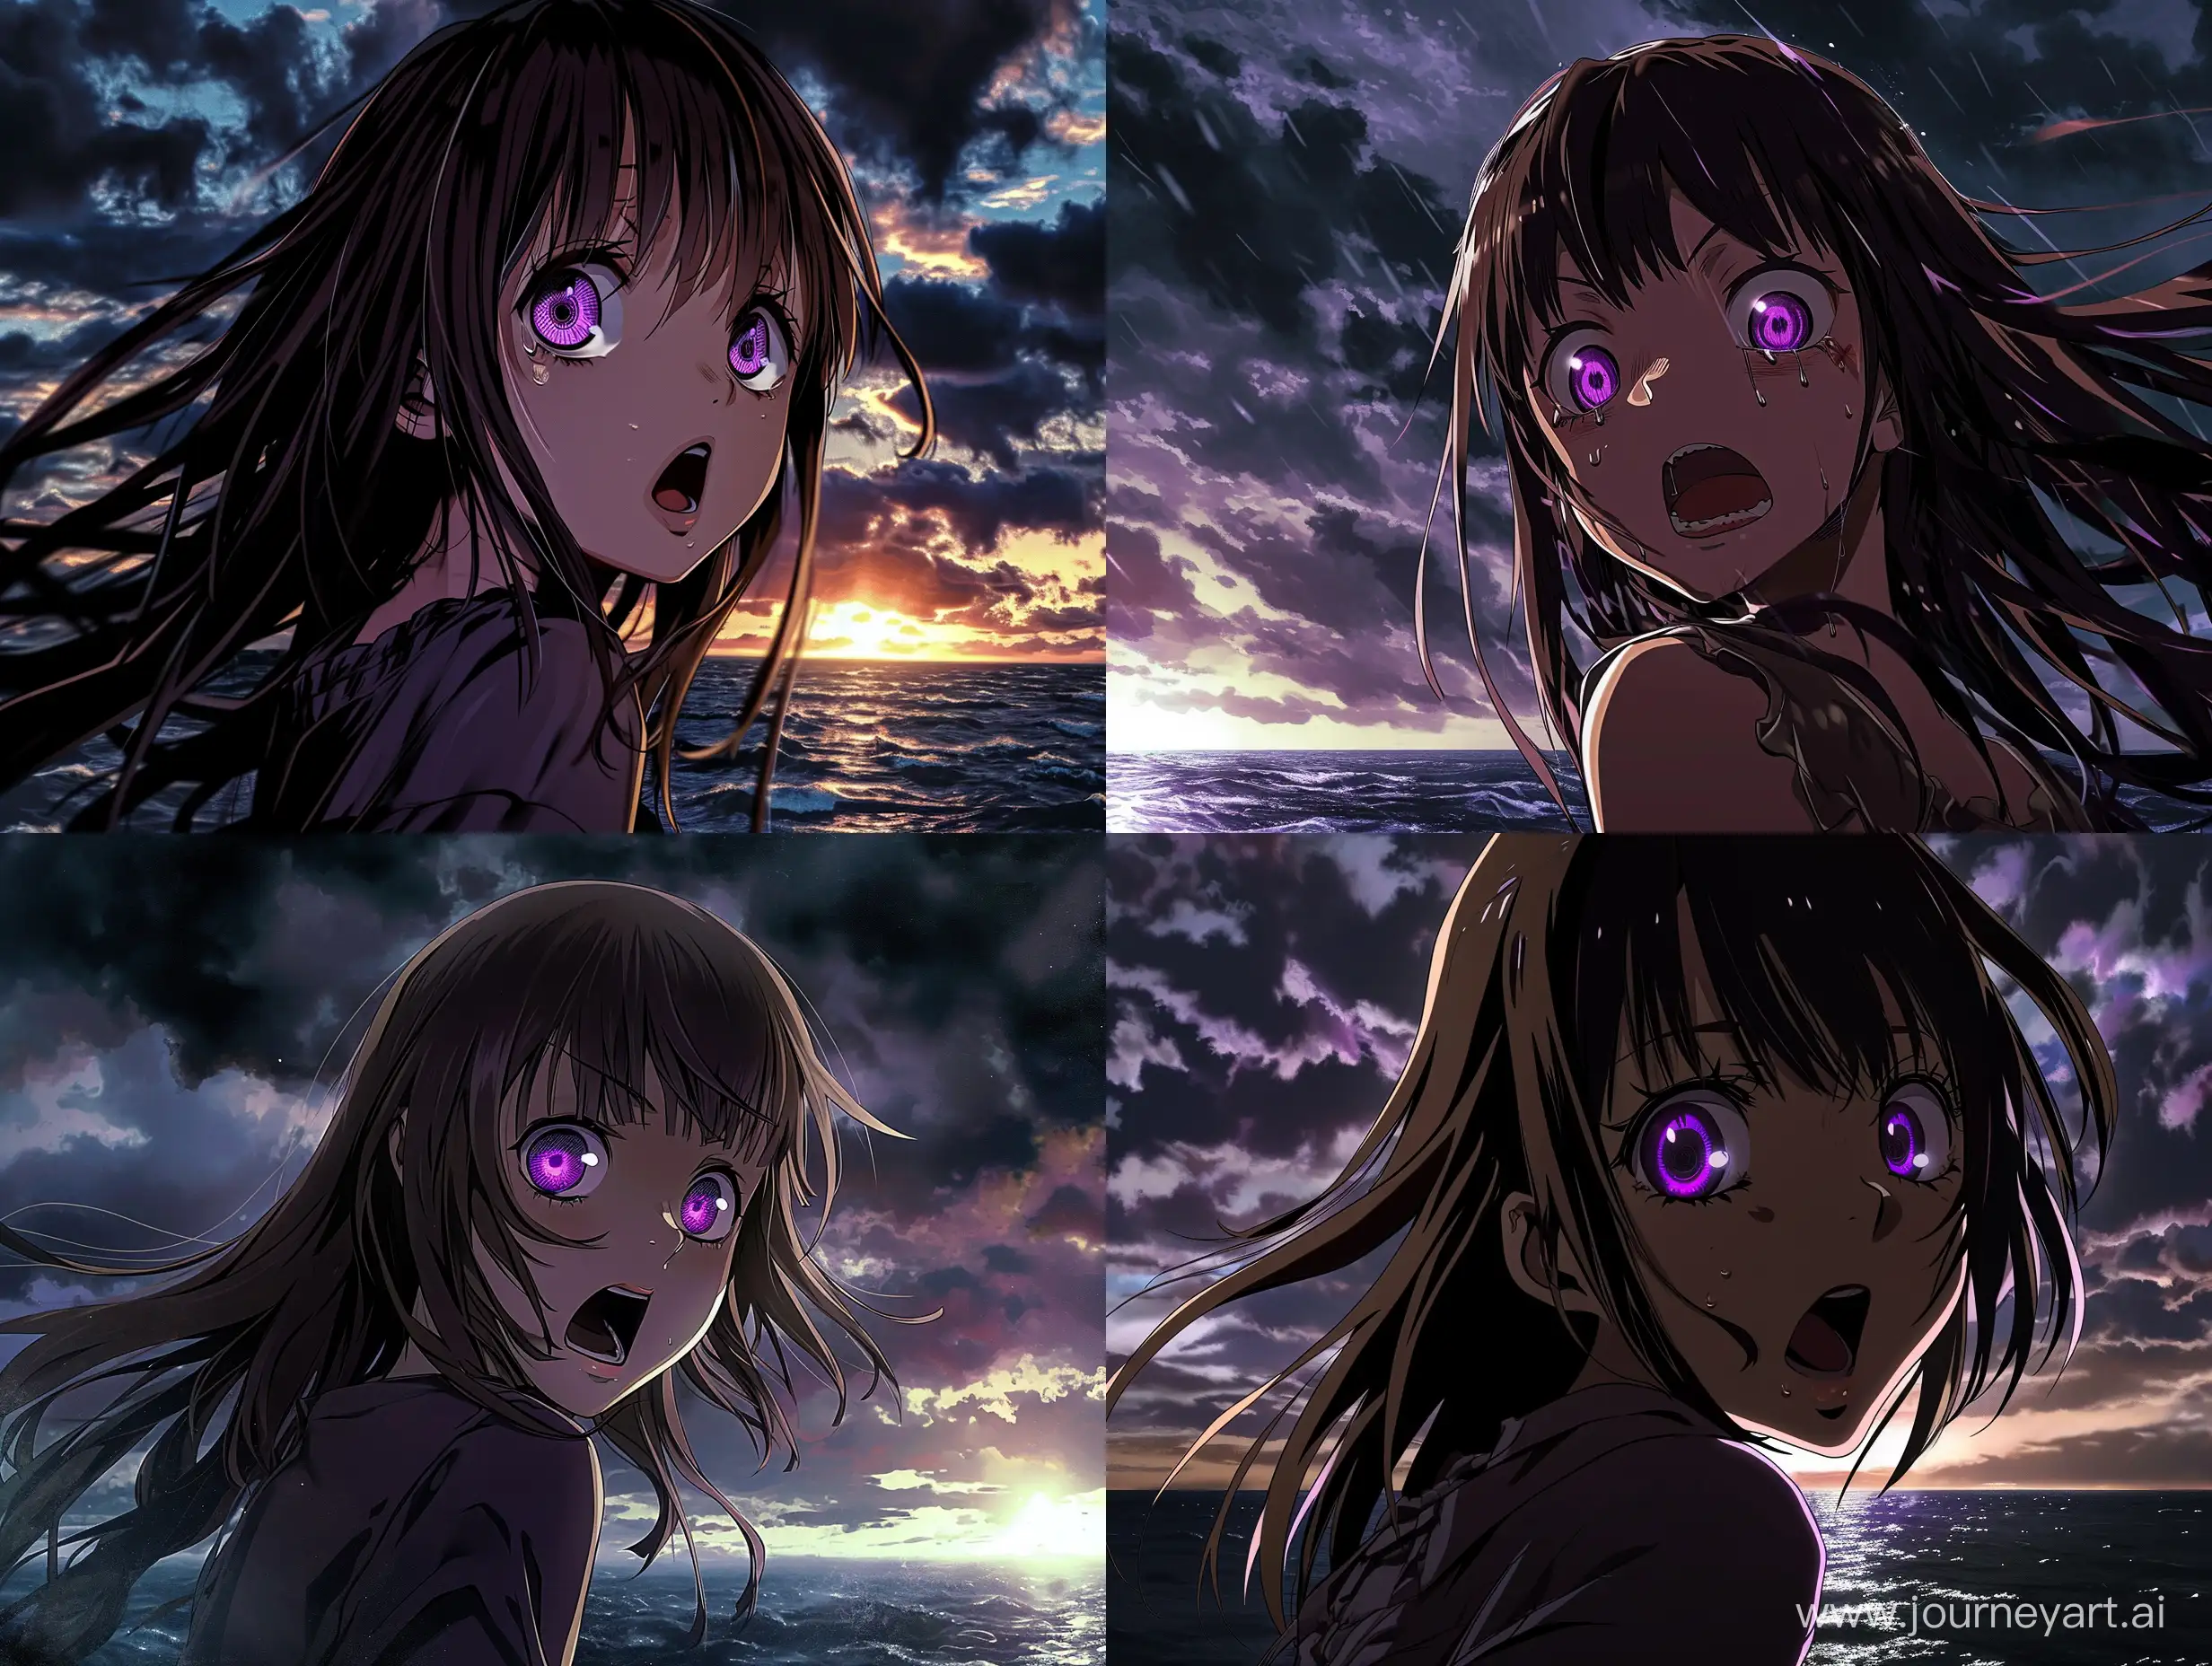 the girl throws her head back and looks over her shoulder directly into the camera, the girl has violet and expressive eyes, her mouth is half open, her hair is straight, brown and long hair covers part of her face, the girl is located in the middle and occupies 1/8 of the image: in the background there is a dark sky with many clouds and sea, girl: manga-style image: detailed image: dark and purple colors predominate